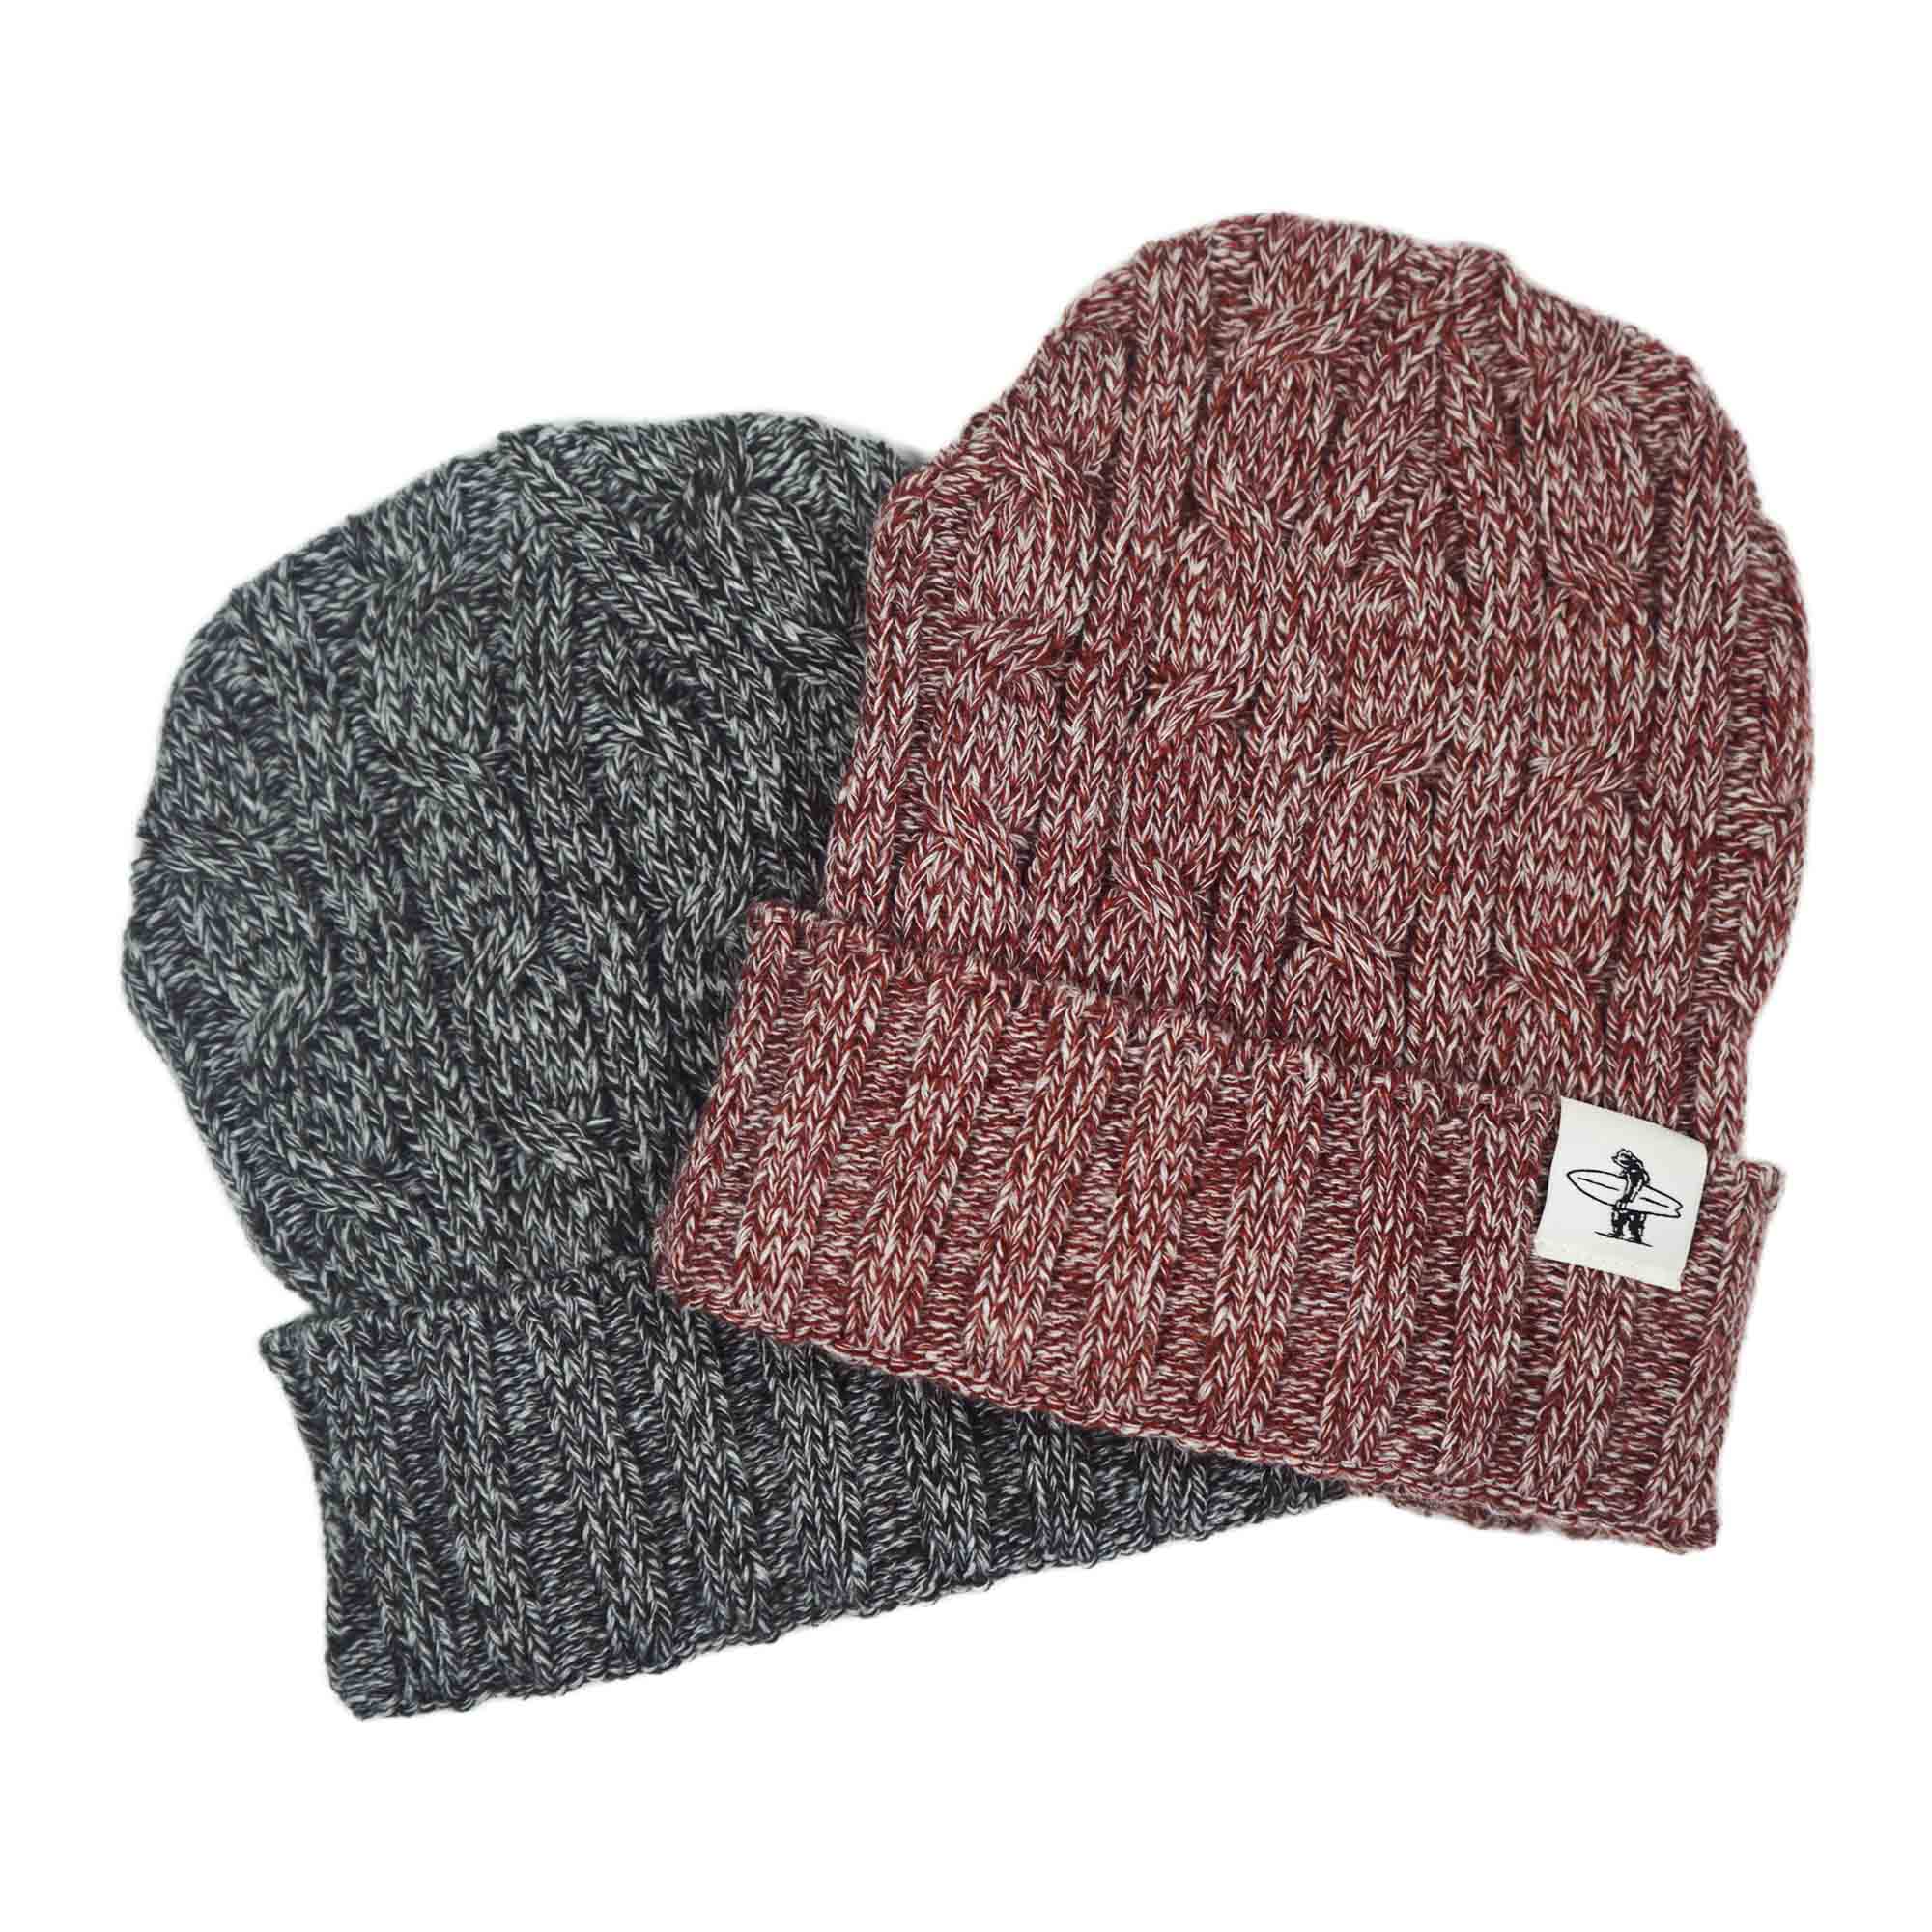 Everyday California Bixby Beanies in both colors